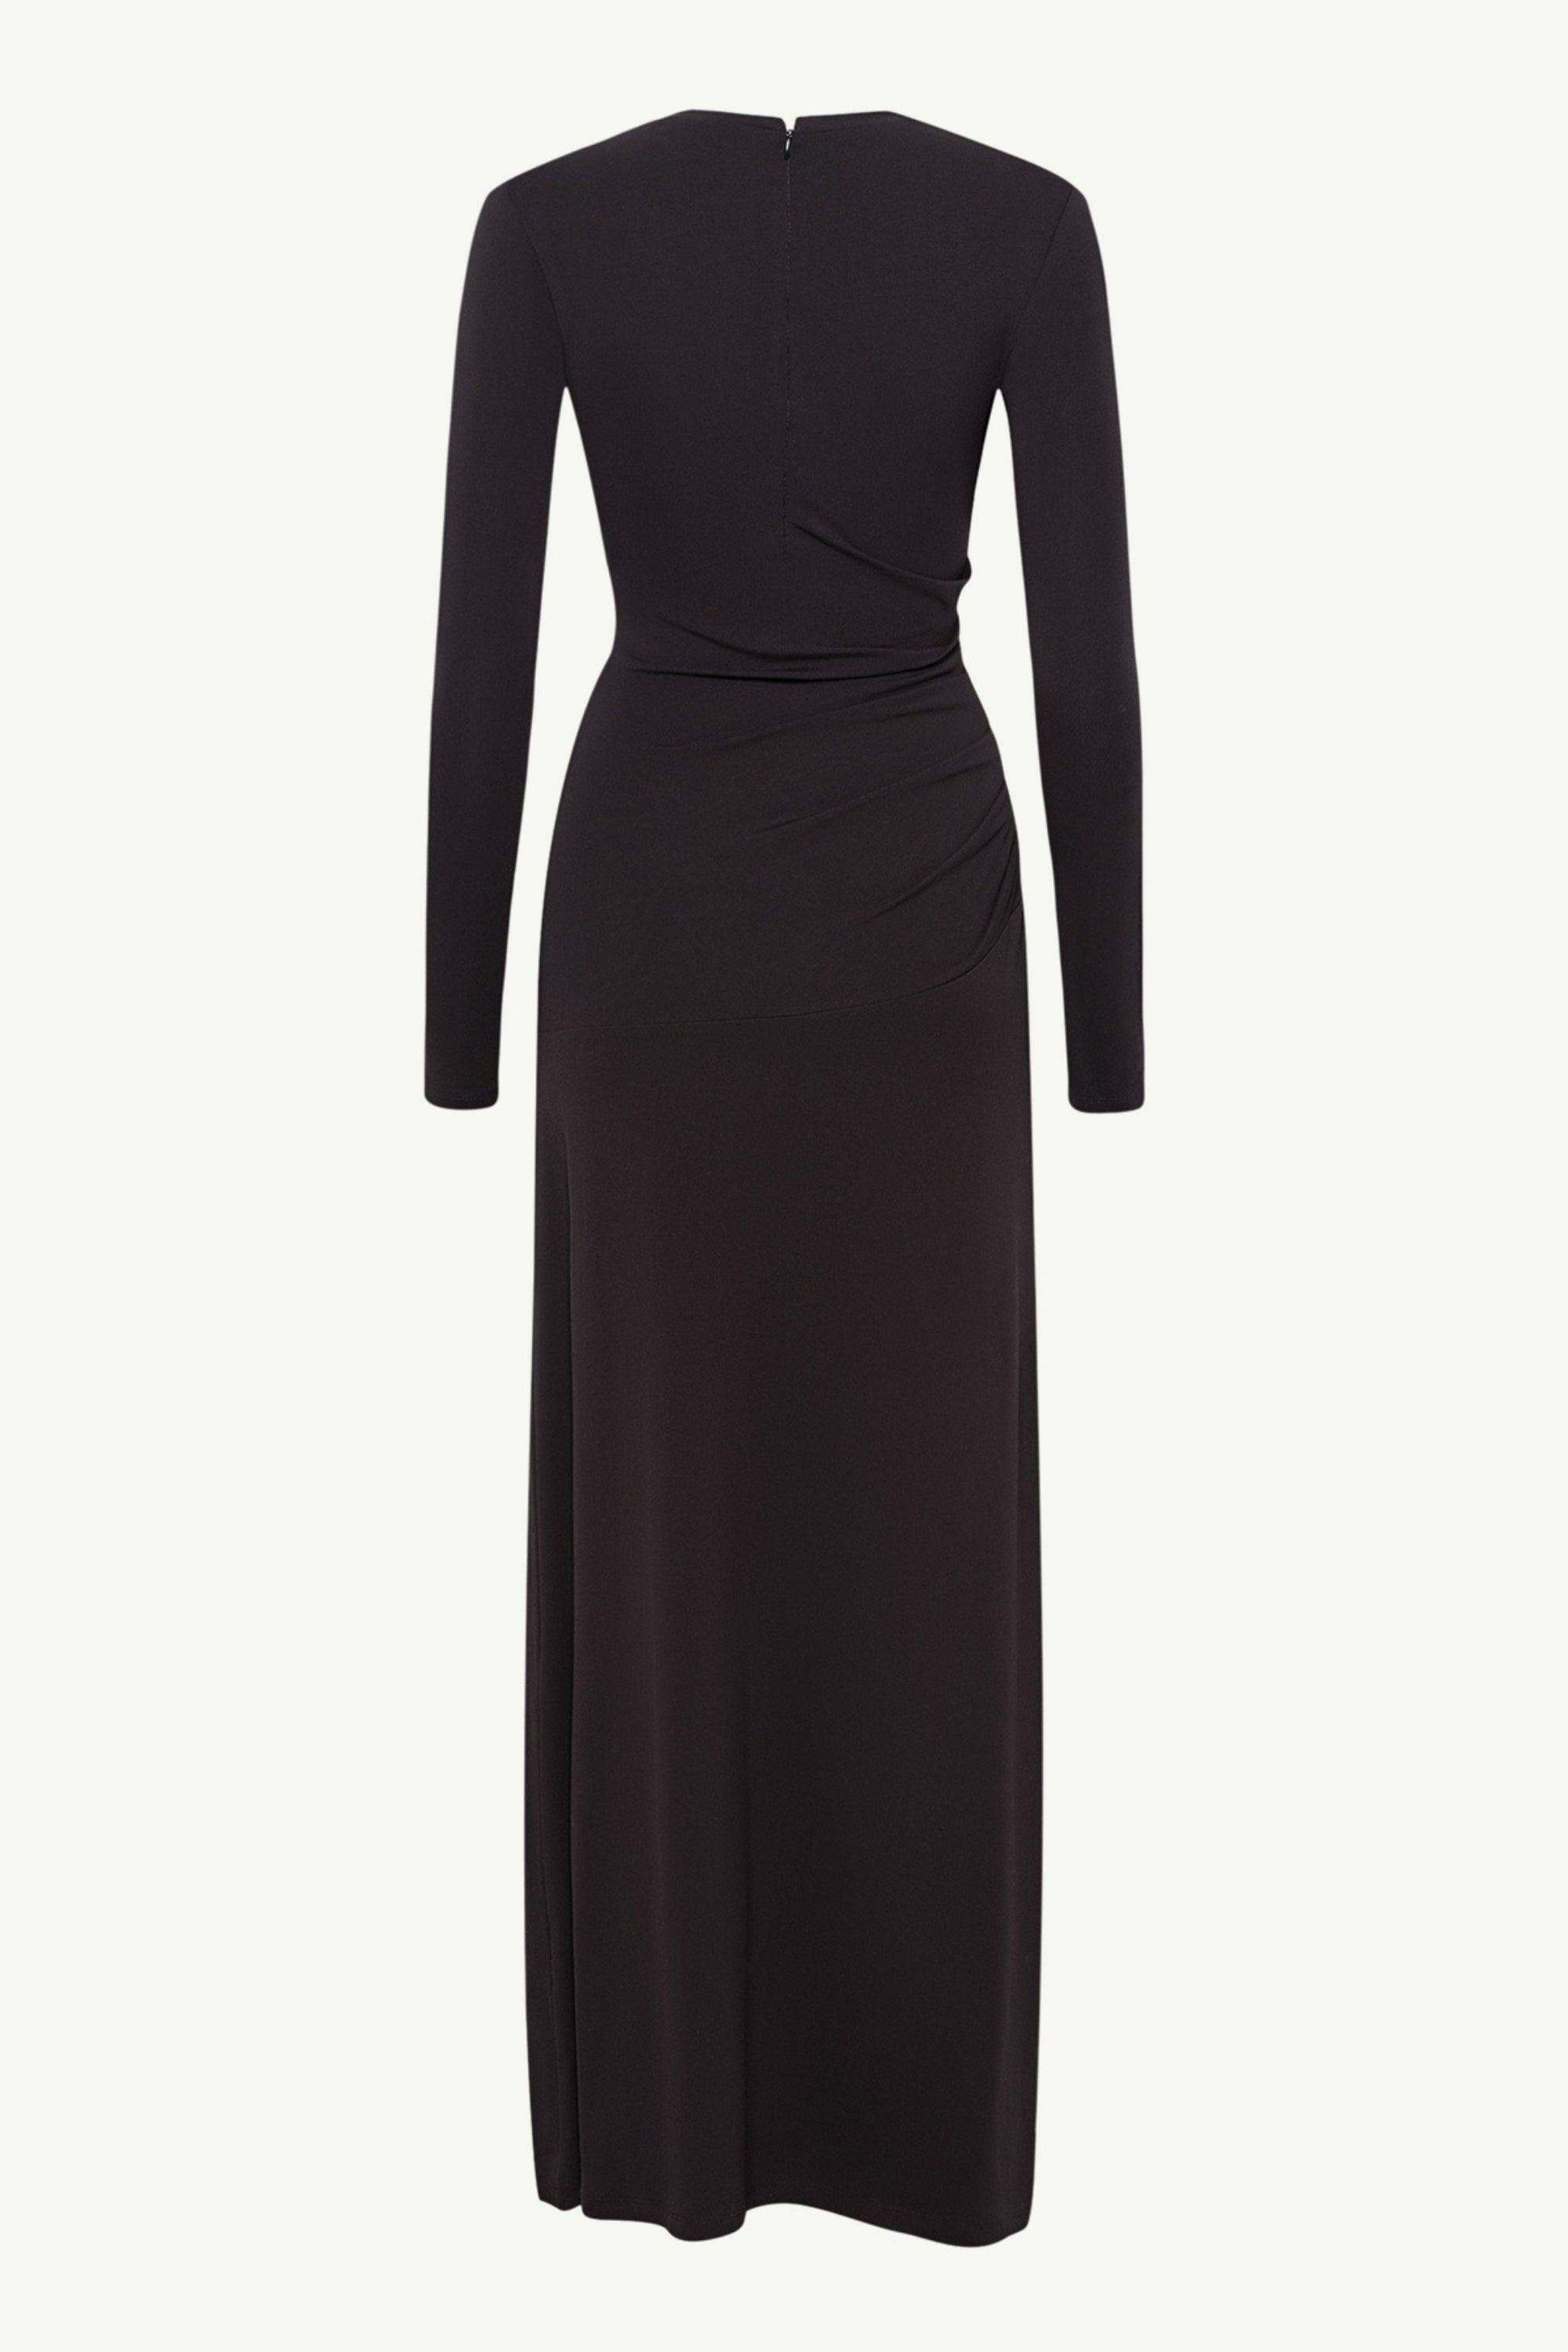 Natalie Rouched Jersey Maxi Dress - Black Clothing epschoolboard 